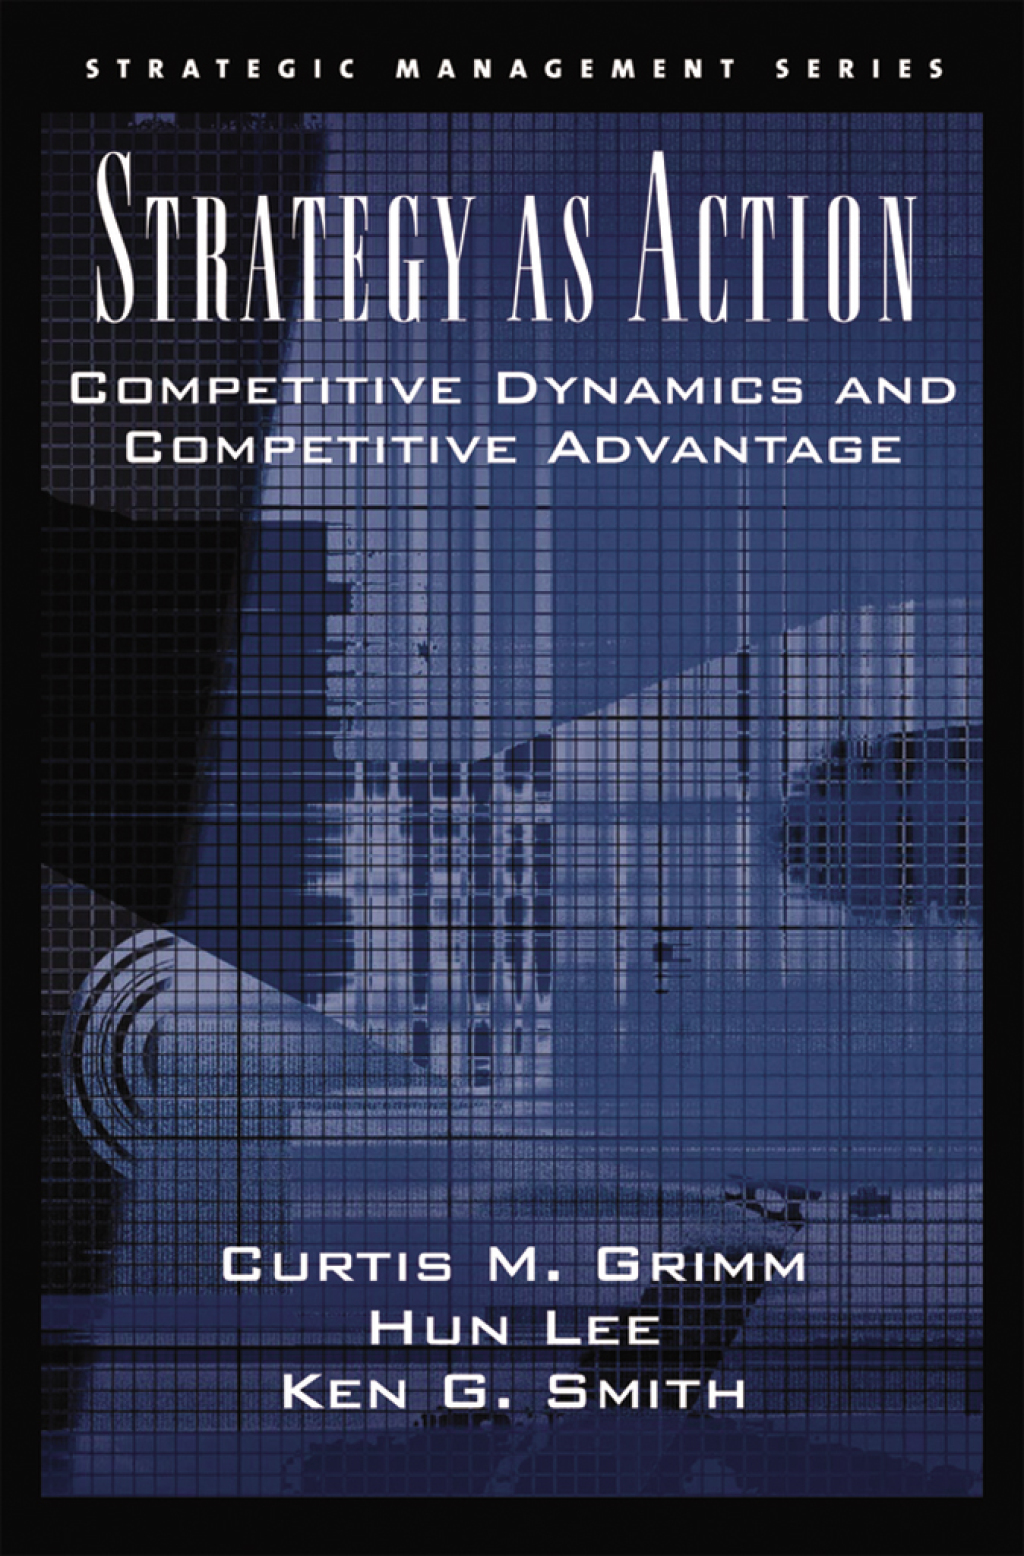 Strategy As Action (eBook Rental) - Curtis M. Grimm; Hun Lee; Ken G. Smith,